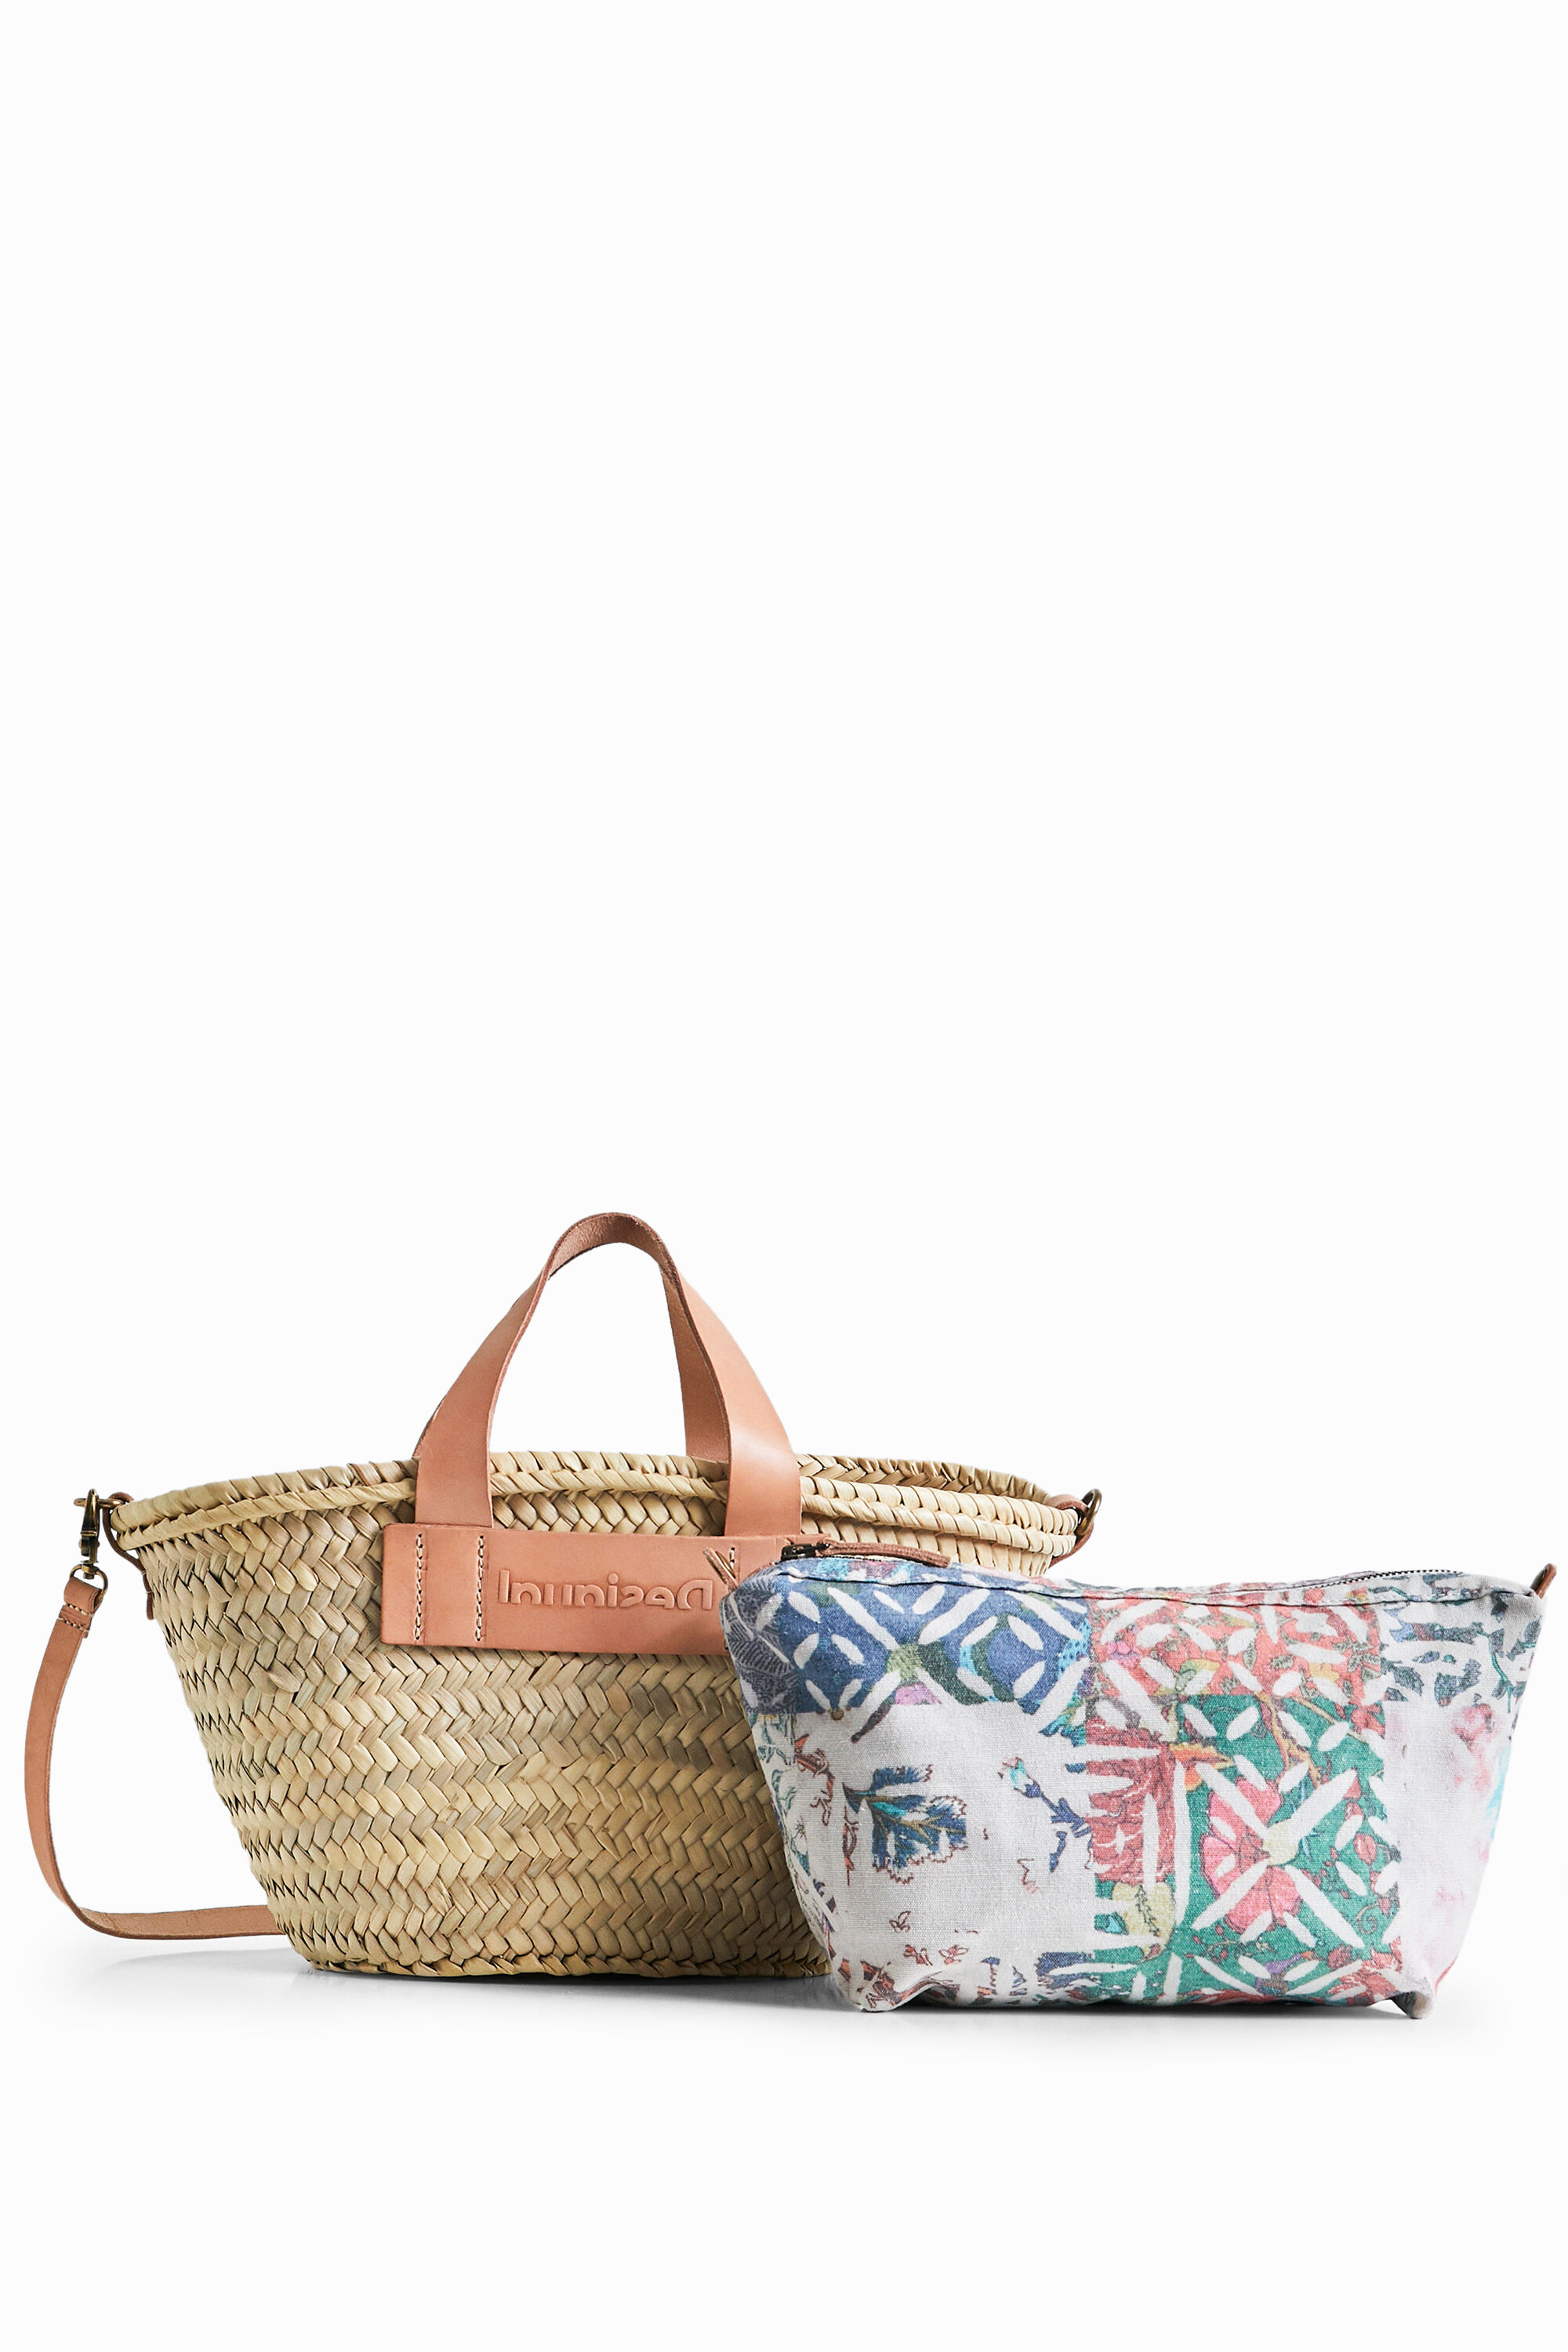 Desigual Medium Basket With Contrasting Straps In White